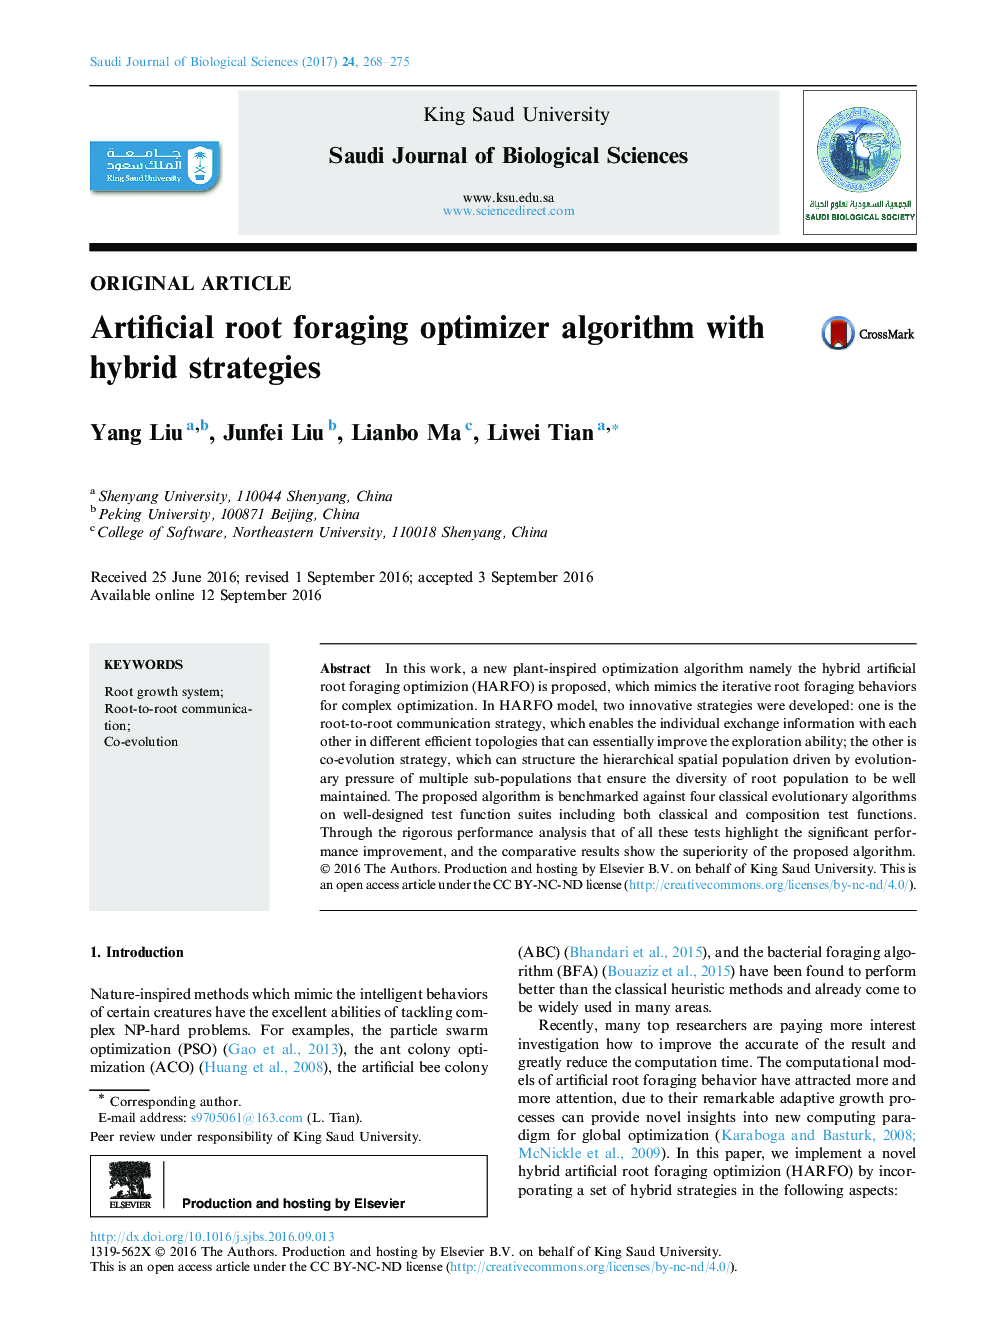 Original articleArtificial root foraging optimizer algorithm with hybrid strategies